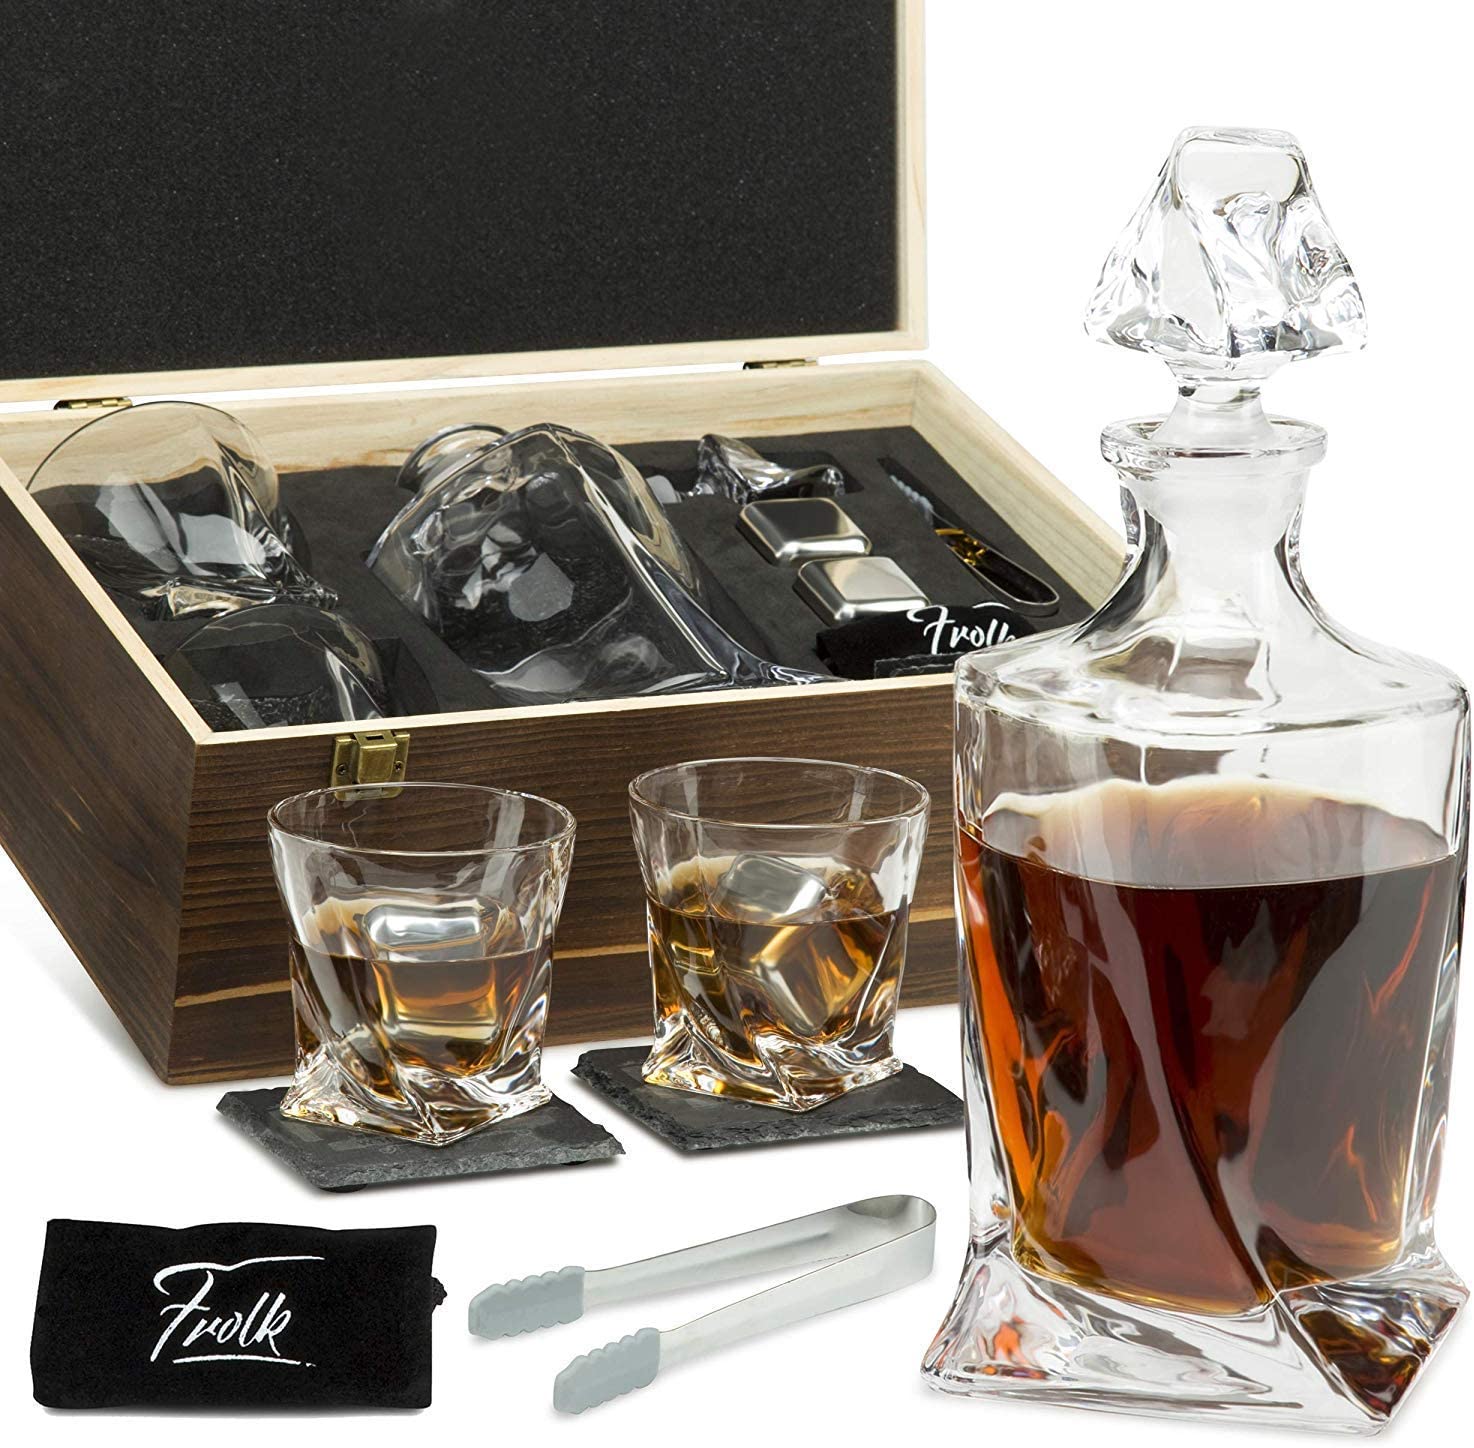 Super Purchasing for Wooden Gift Box -  Castrol Logo Promotion Gift twistle whiskey decanter and glass stainless steel ice cube stone gift set  – Shunstone